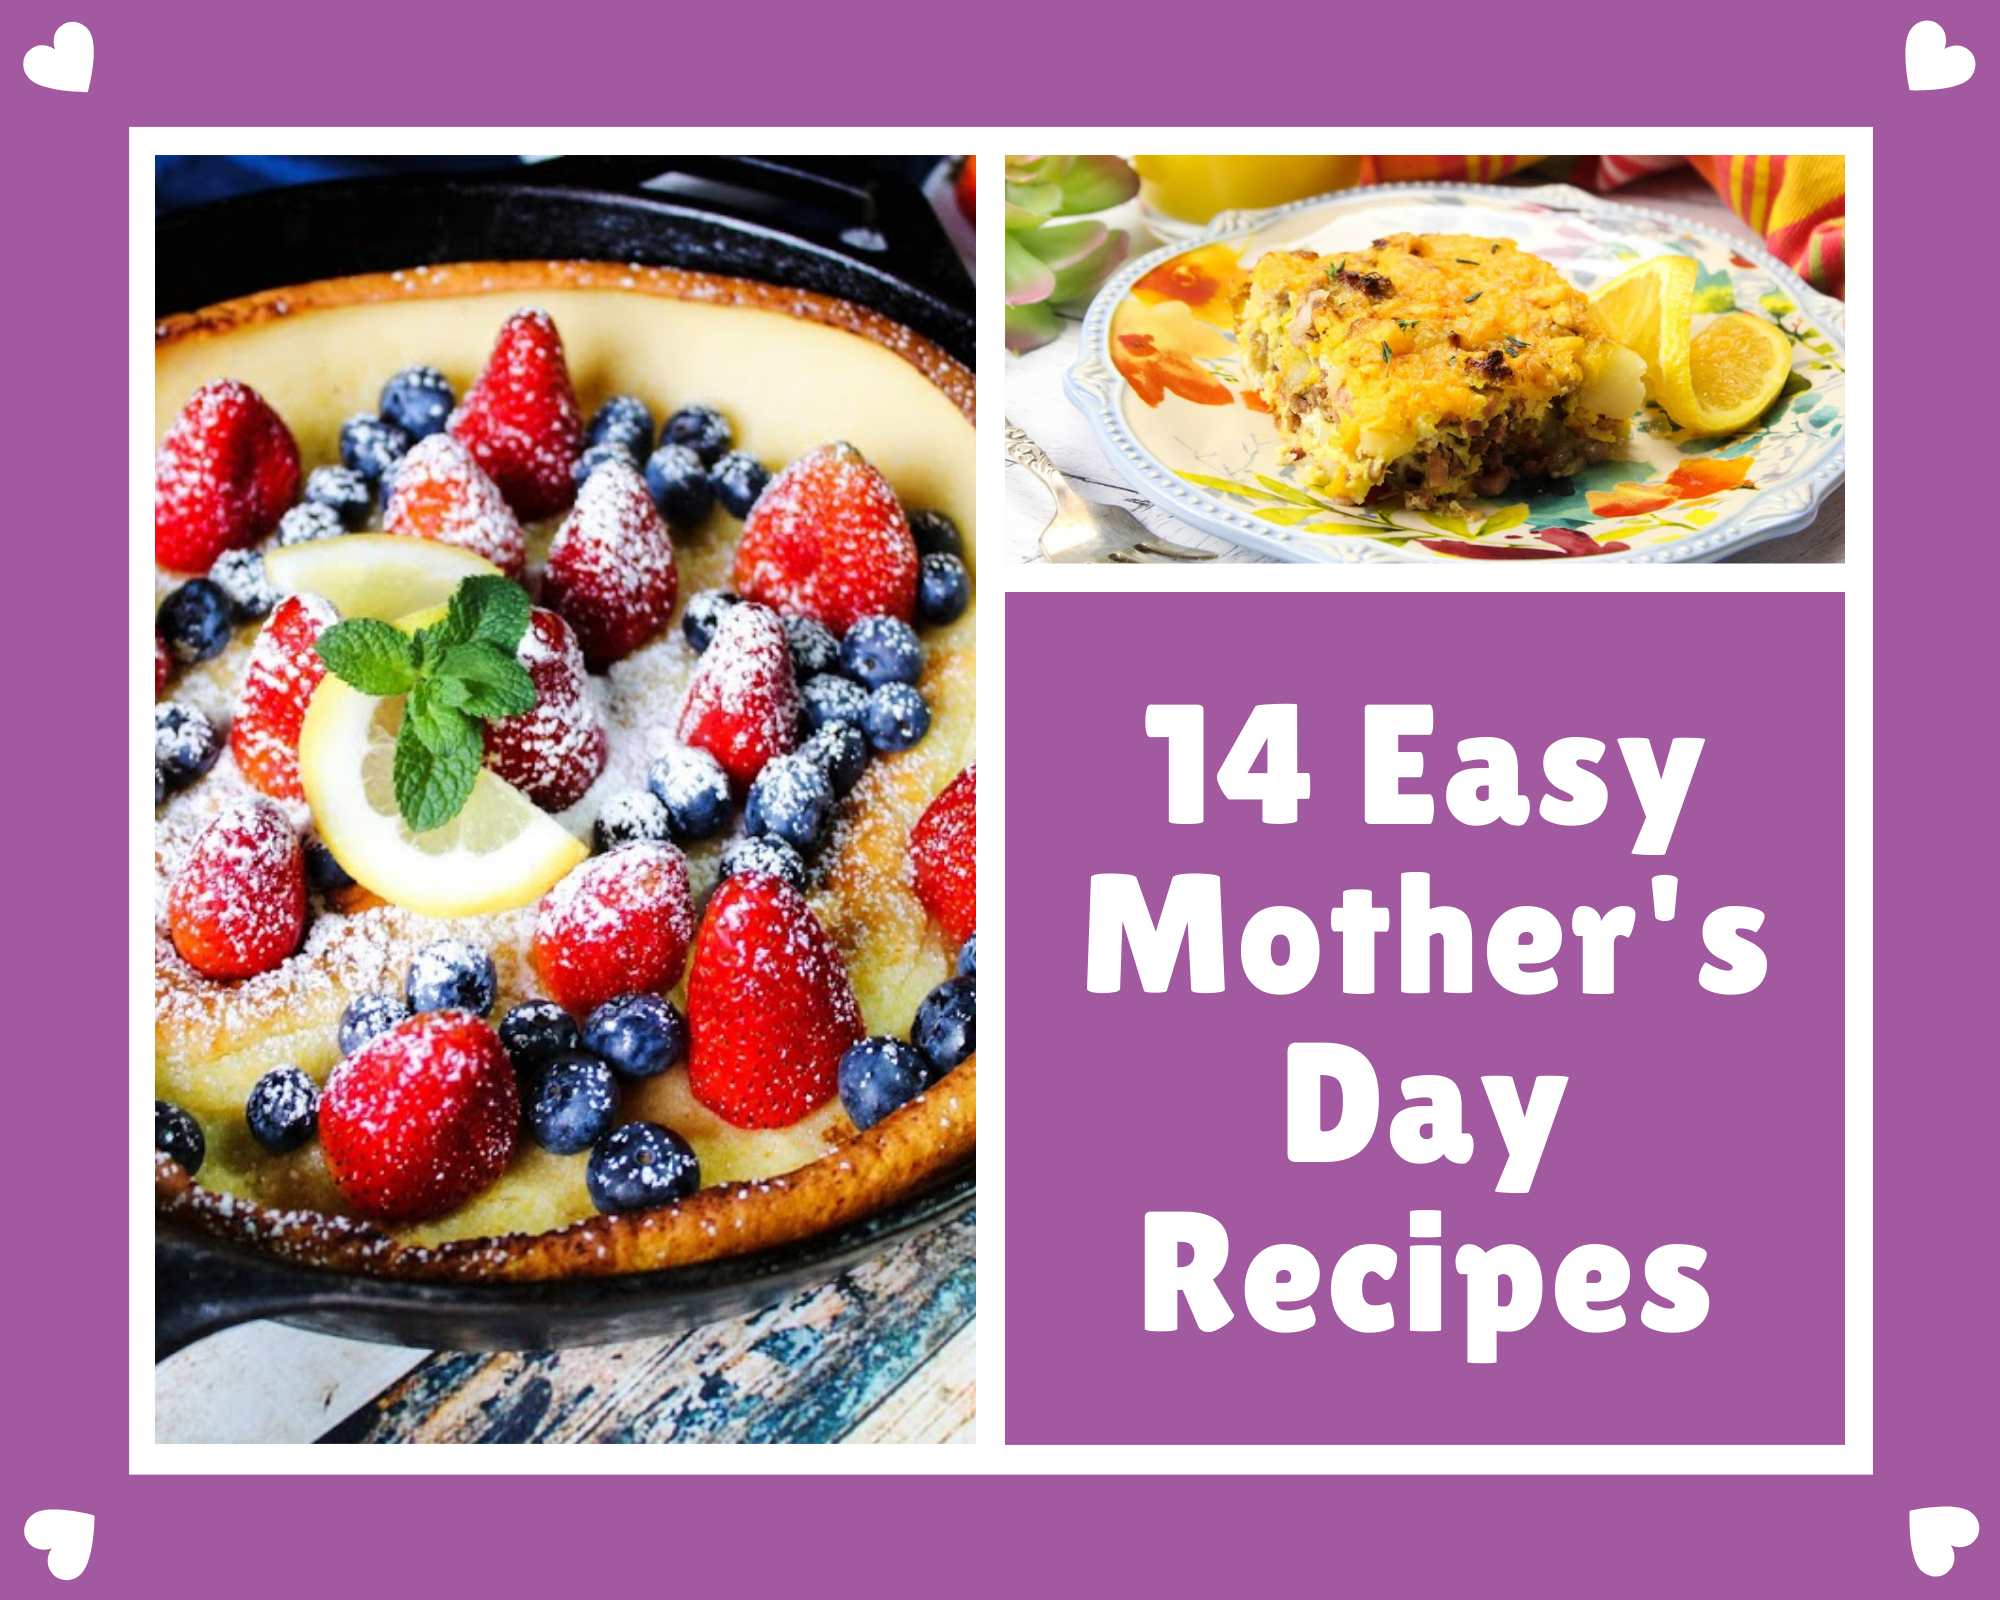 Easy Mother's Day Recipes